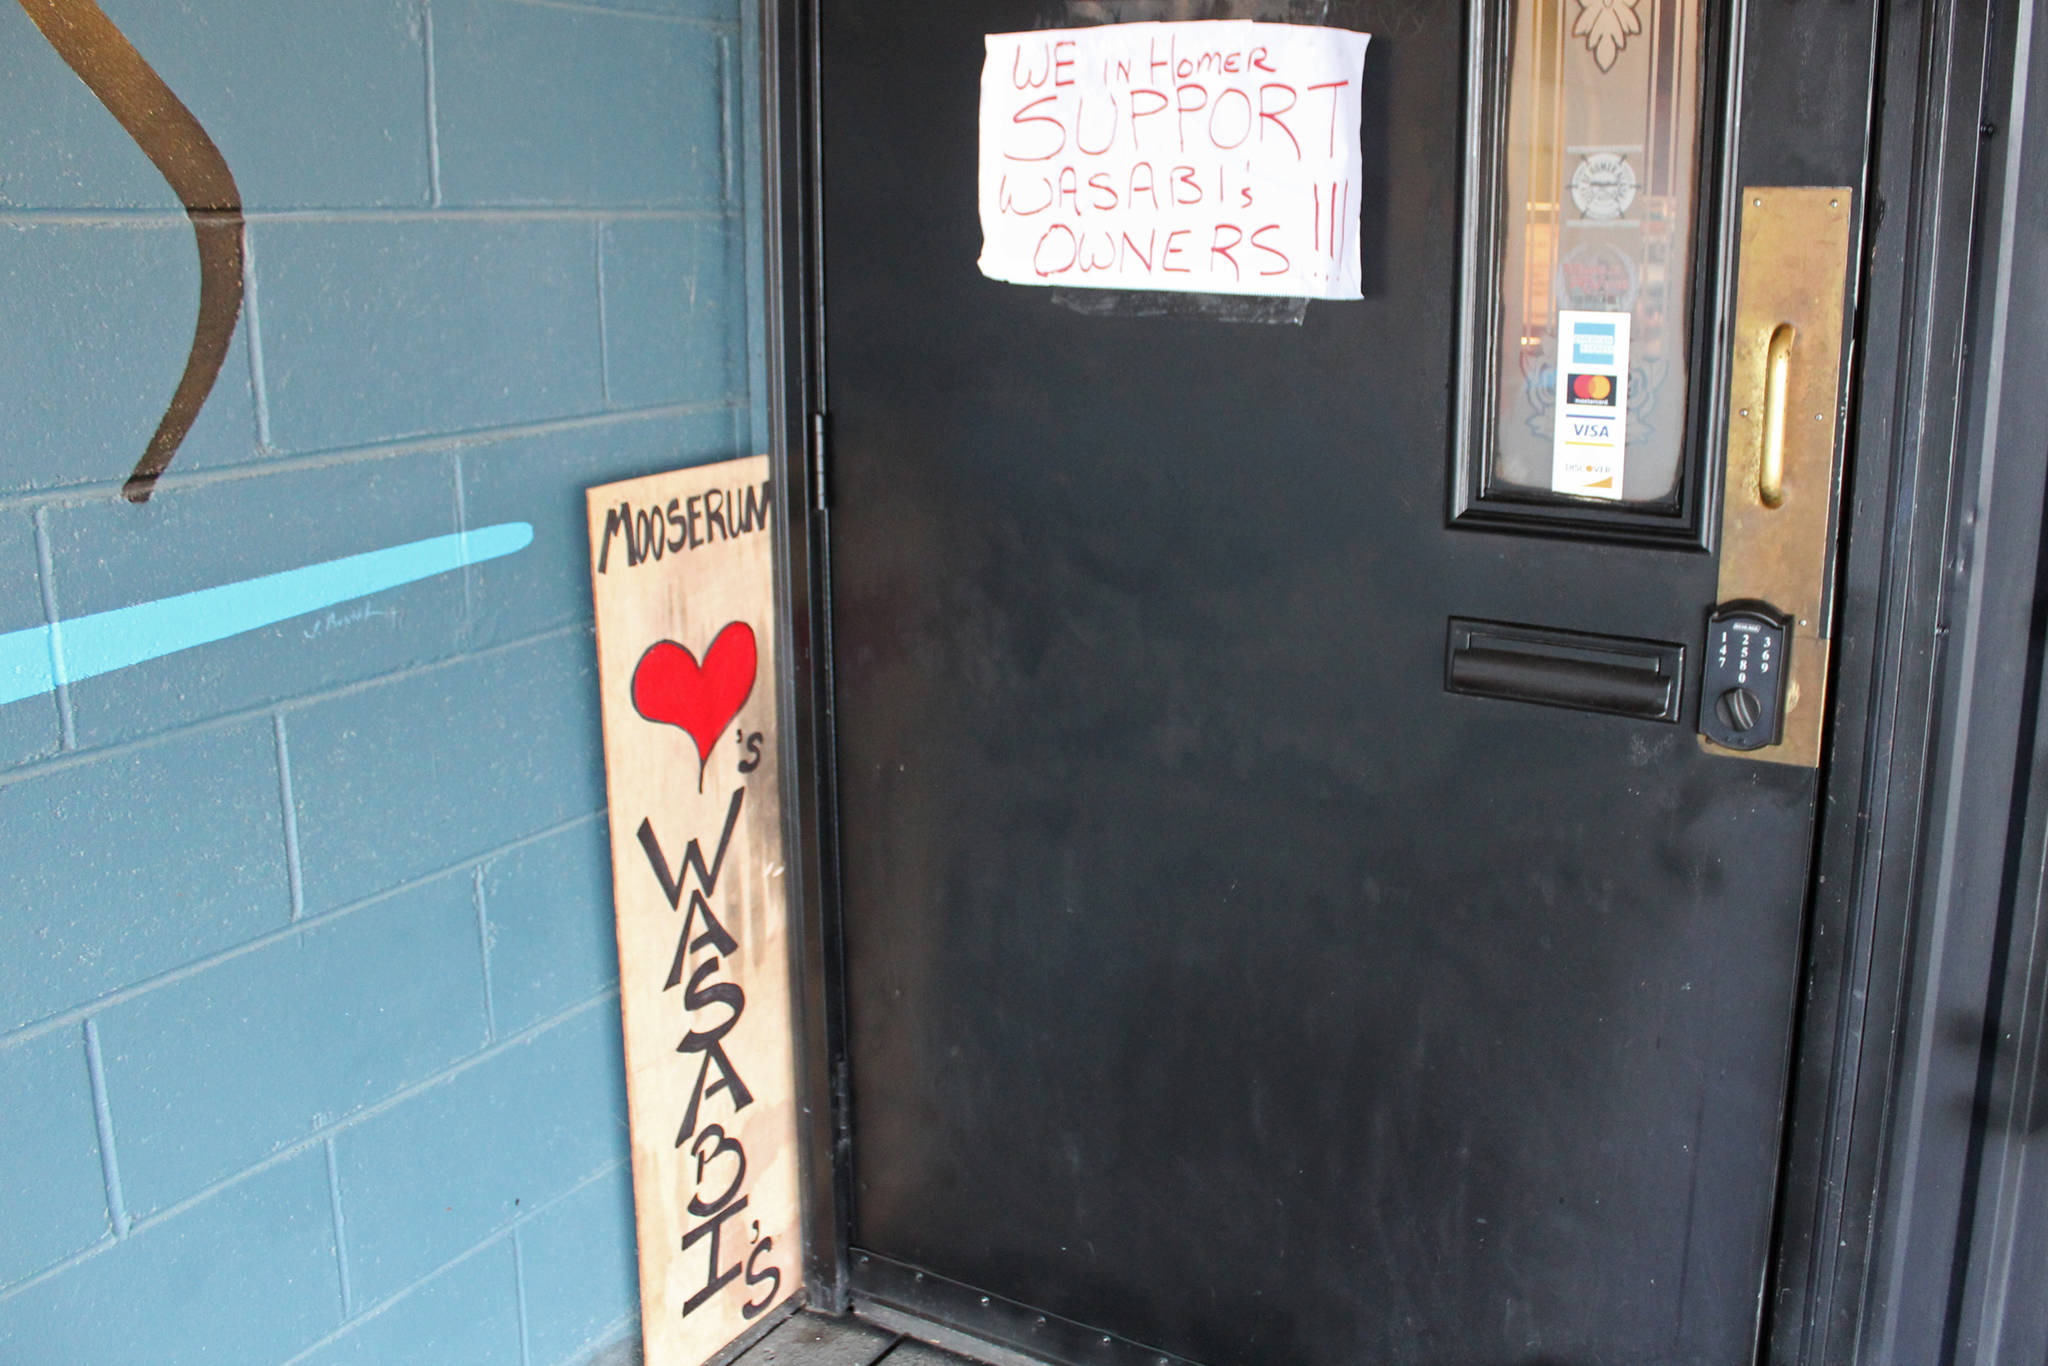 Messages of support surround the door to Wasabi’s Bistro on Thursday, March 21, 2019 in Homer, Alaska. Members of the community put up the signs and flocked to the restaurant last Thursday after the building was vandalized with racist graffiti. (Photo by Megan Pacer/Homer News)